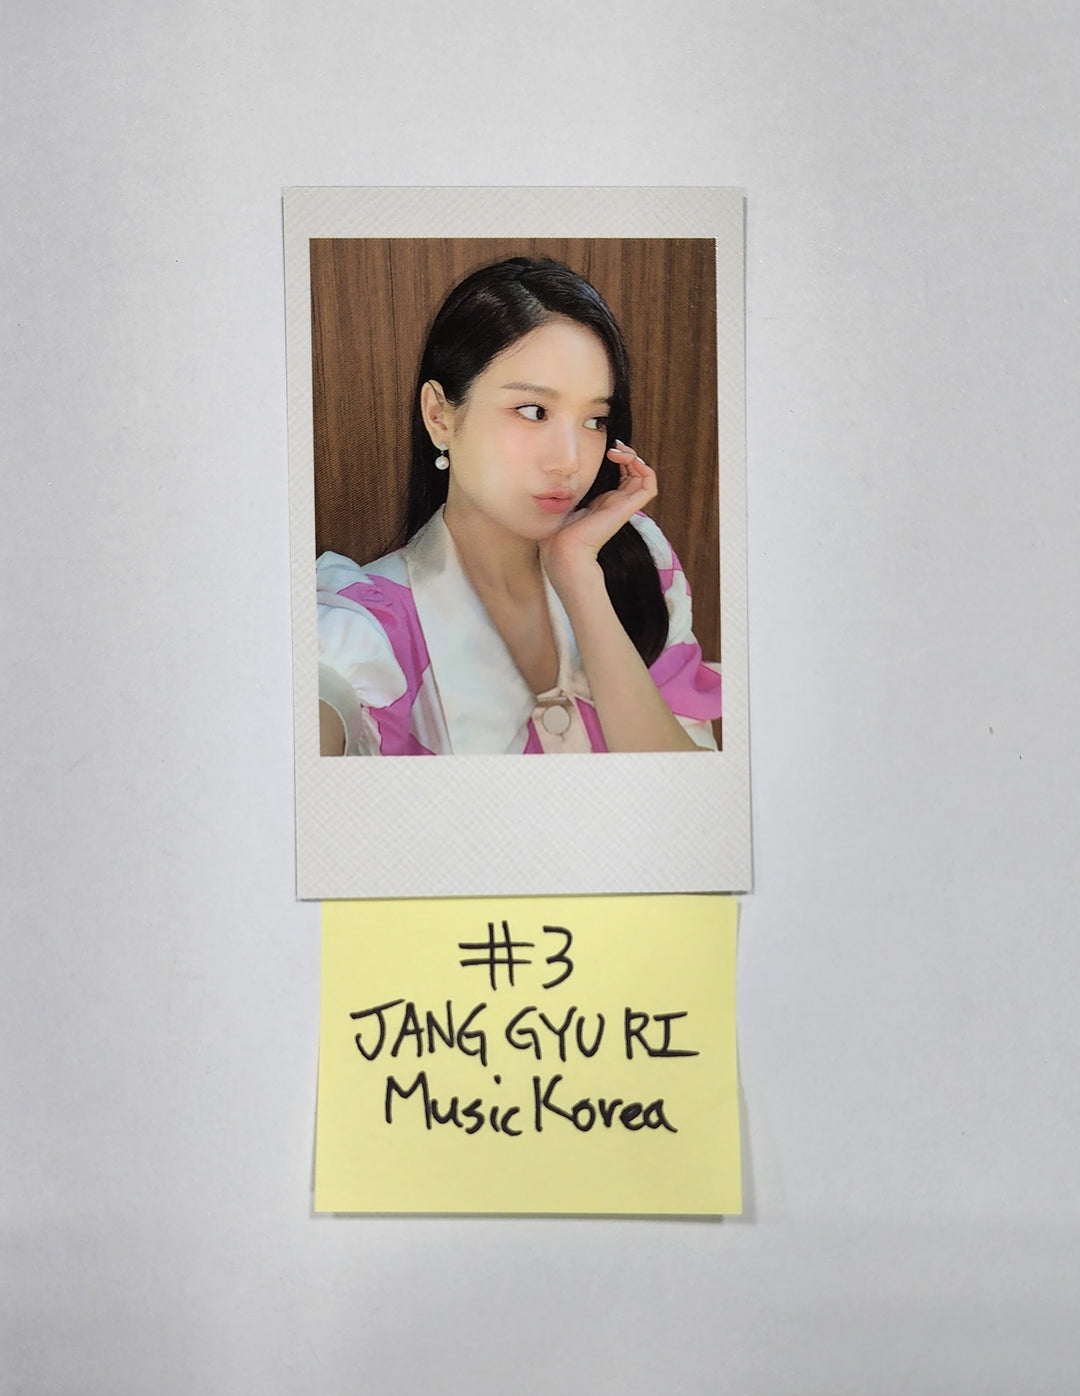 Fromis_9 "from our Memento Box" - Music Korea Pre-Order Benefit Polaroid Type Photocard